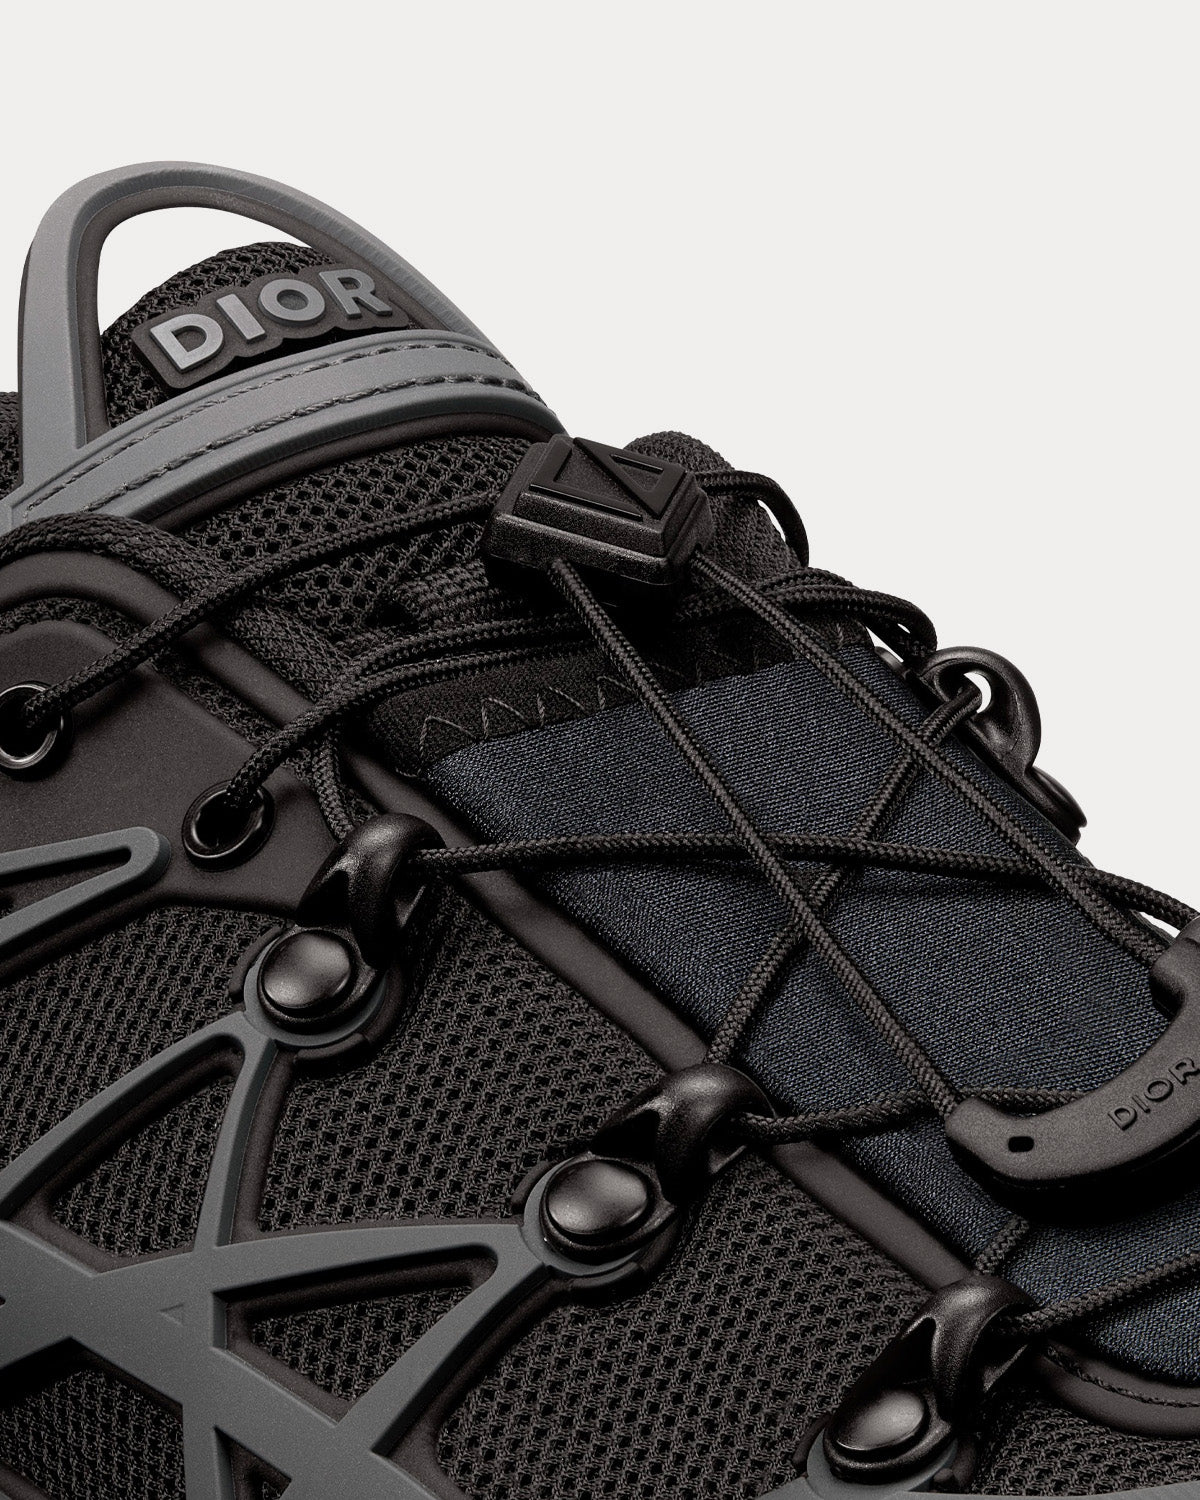 Dior B31 Runner Technical Mesh & Rubber with Warped Cannage Motif Black / Anthracite Grey Low